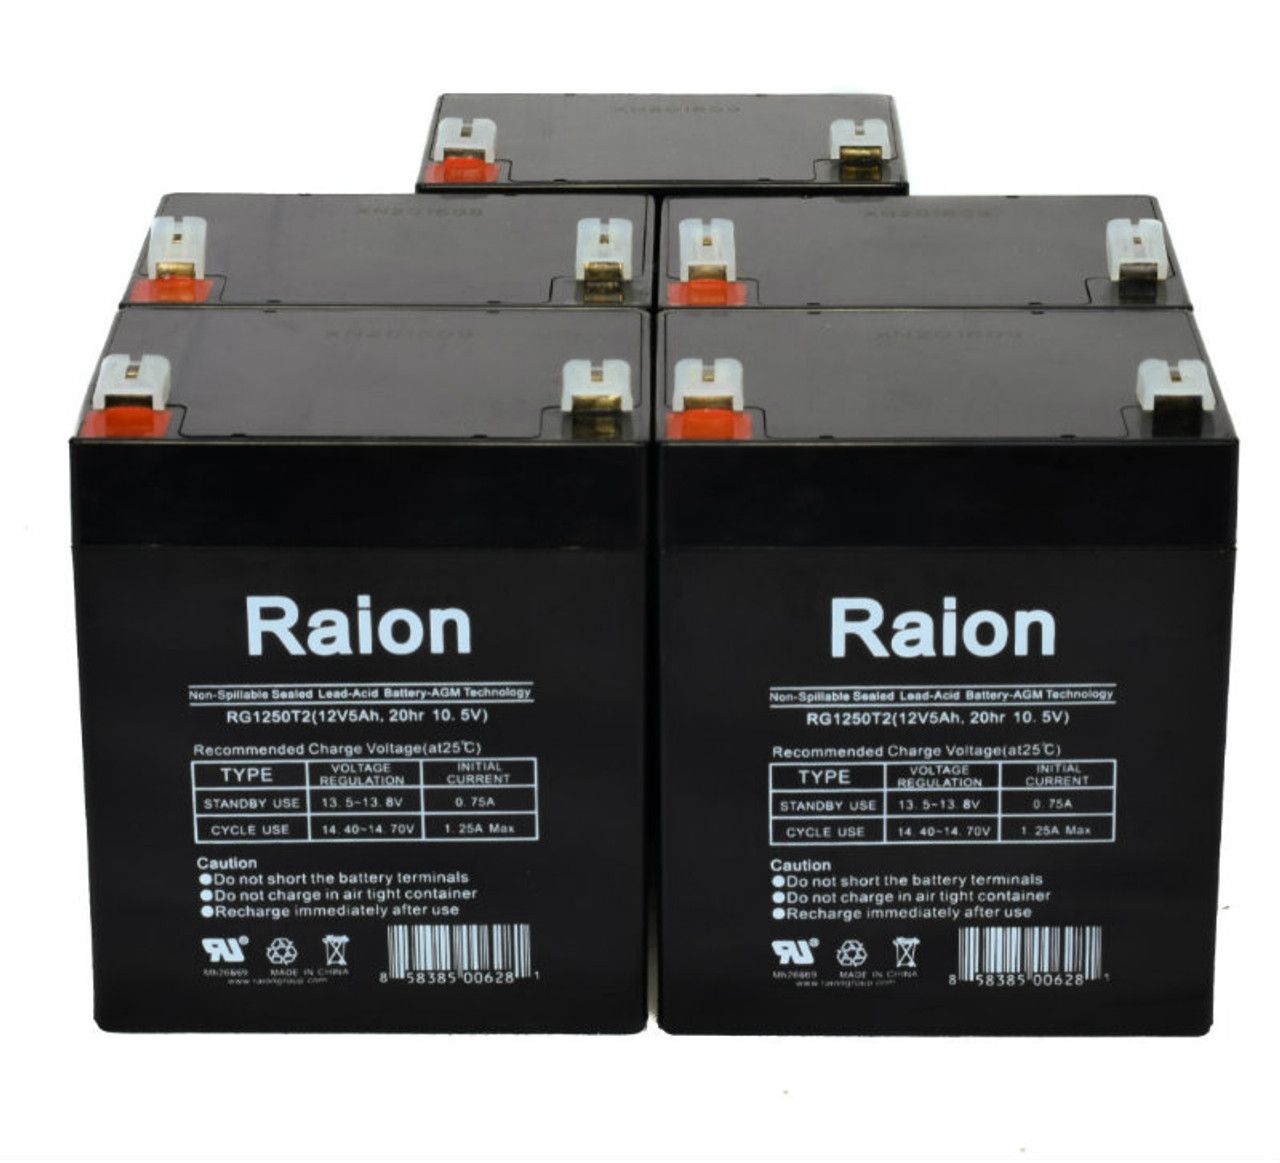 Raion Power RG1250T1 Replacement Fire Alarm Control Panel Battery for ADT Security Alarm - 5 Pack